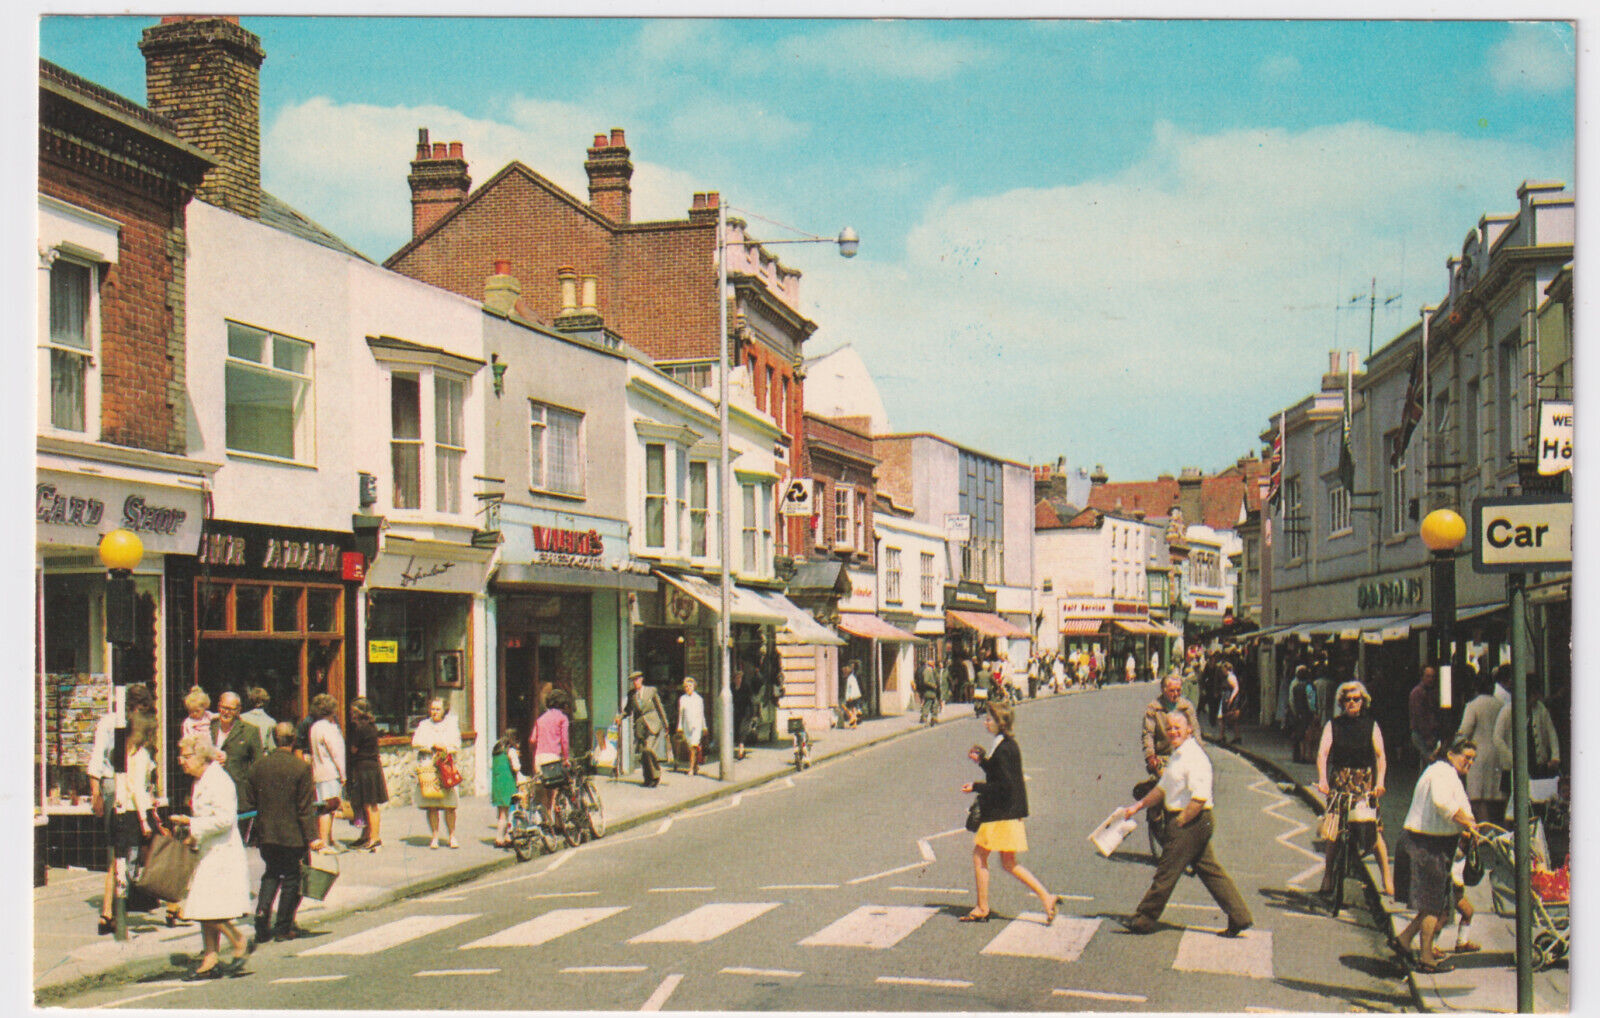 UK KENT WHITSTABLE HIGH STREET POSTCARD PUBLISHED BY COLOURMASTER CIRCA 1968.